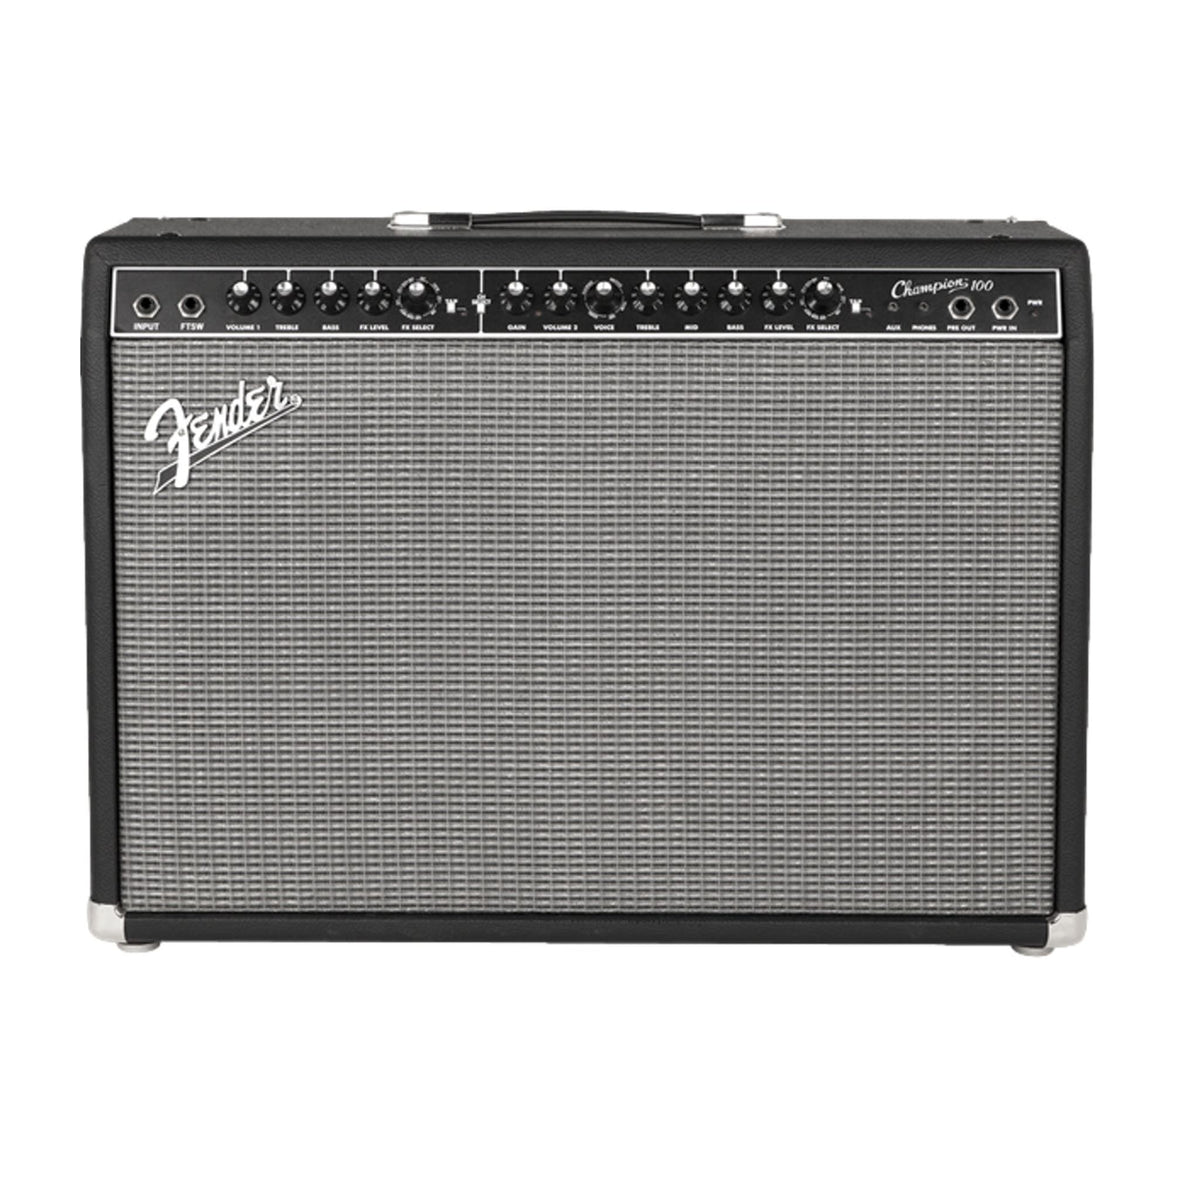 The Fender Champion 100 Guitar Amp is easy to use and versatile enough for any style of guitar playing, the 100-watt Champion 100 is an ideal choice as a powerful 2x12&quot; practice amp and affordable stage amp.